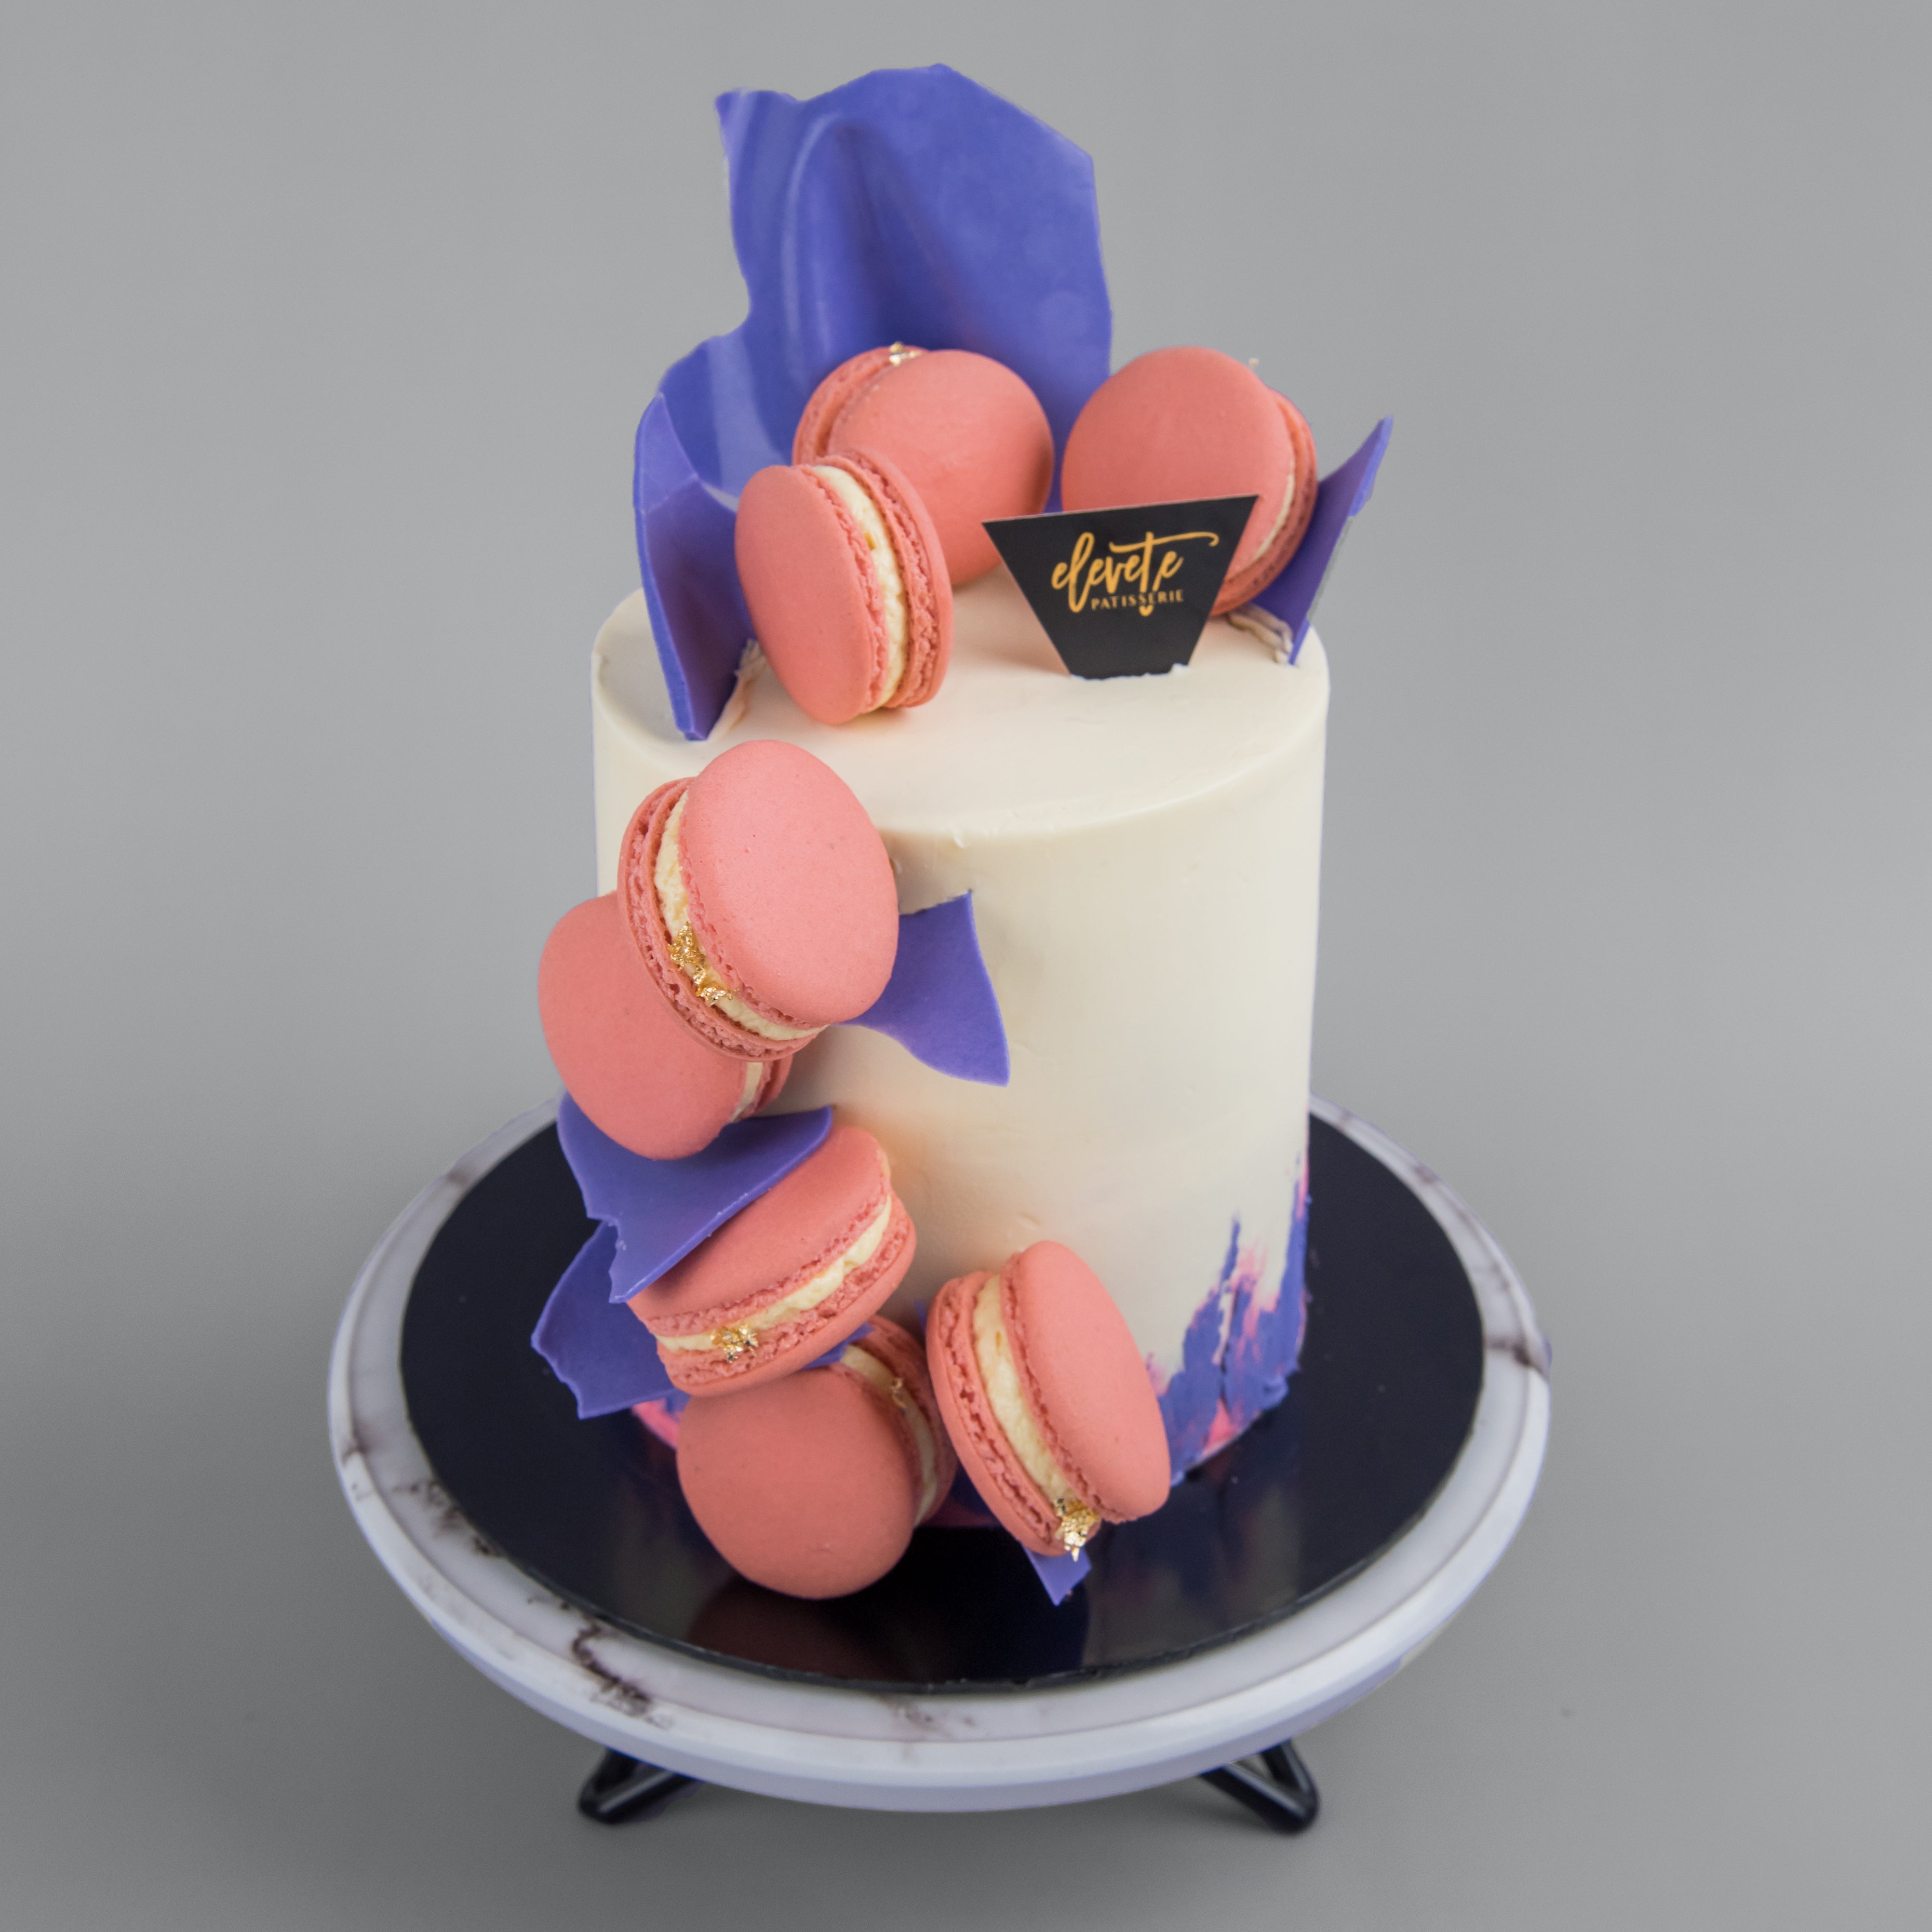 Clingy Macaron Cake 5 Inch (1.3kg)